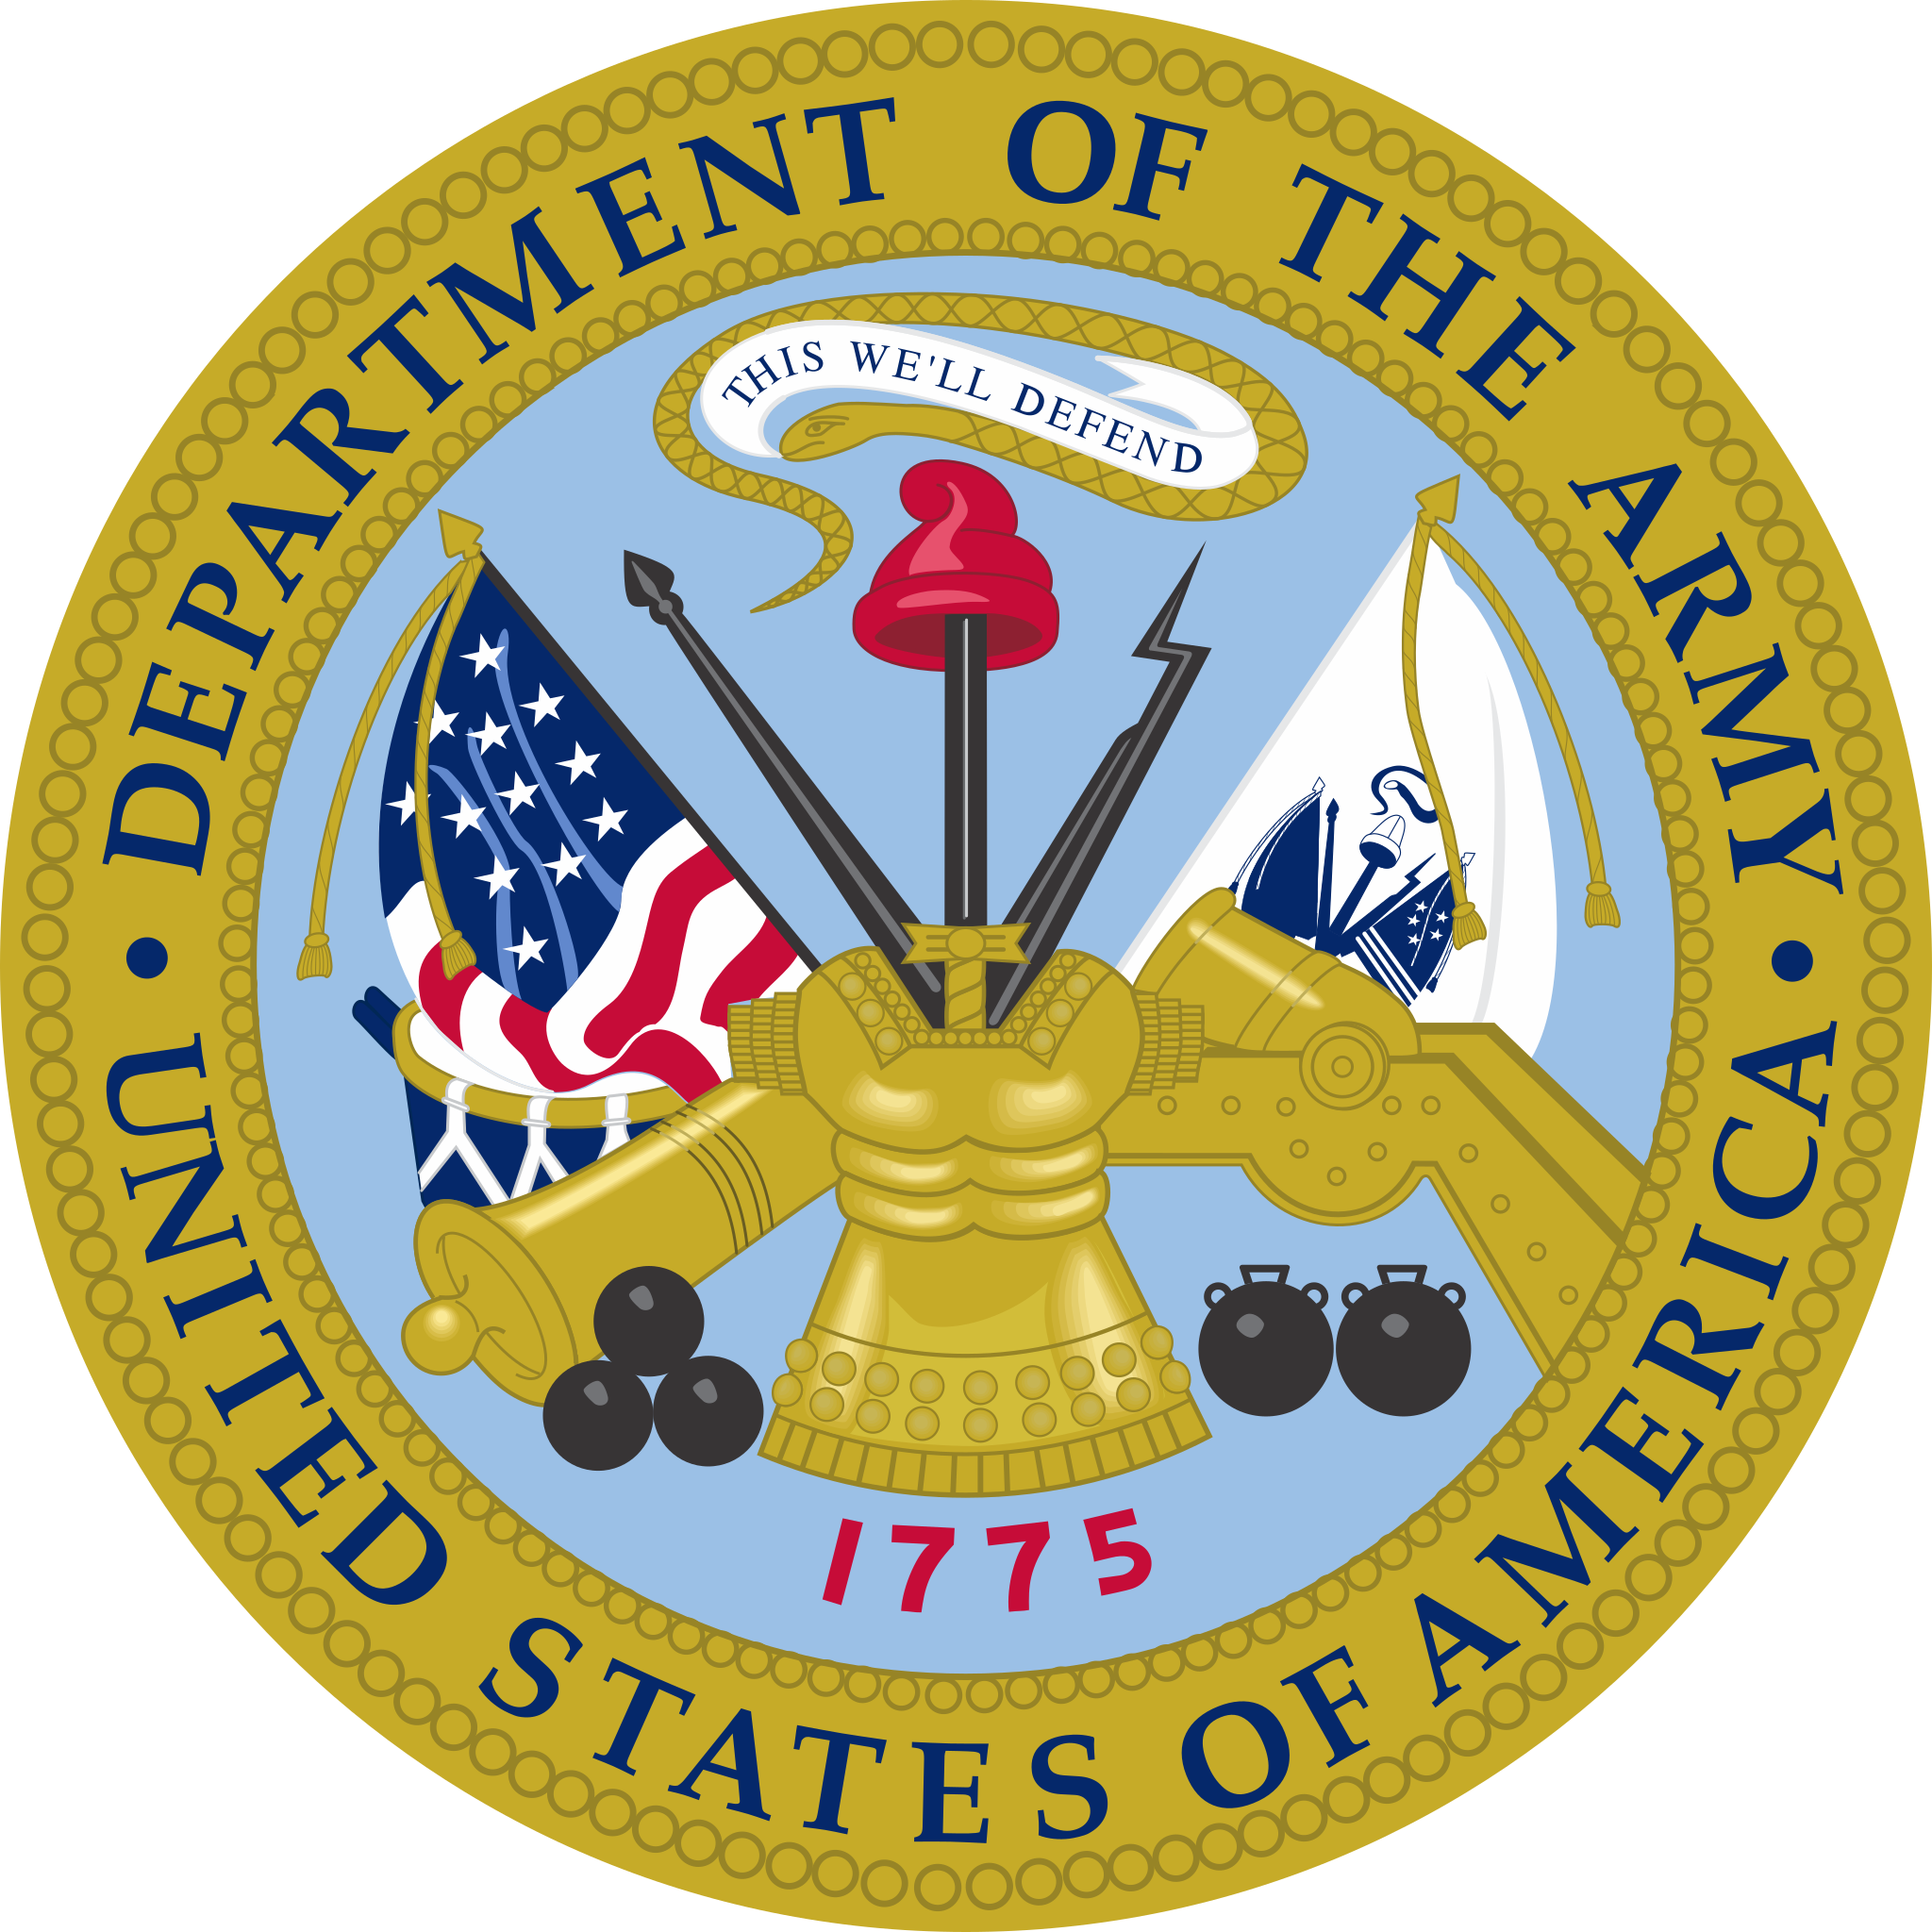 Department of the Army: This is an image of the United States Department of the Army logo.